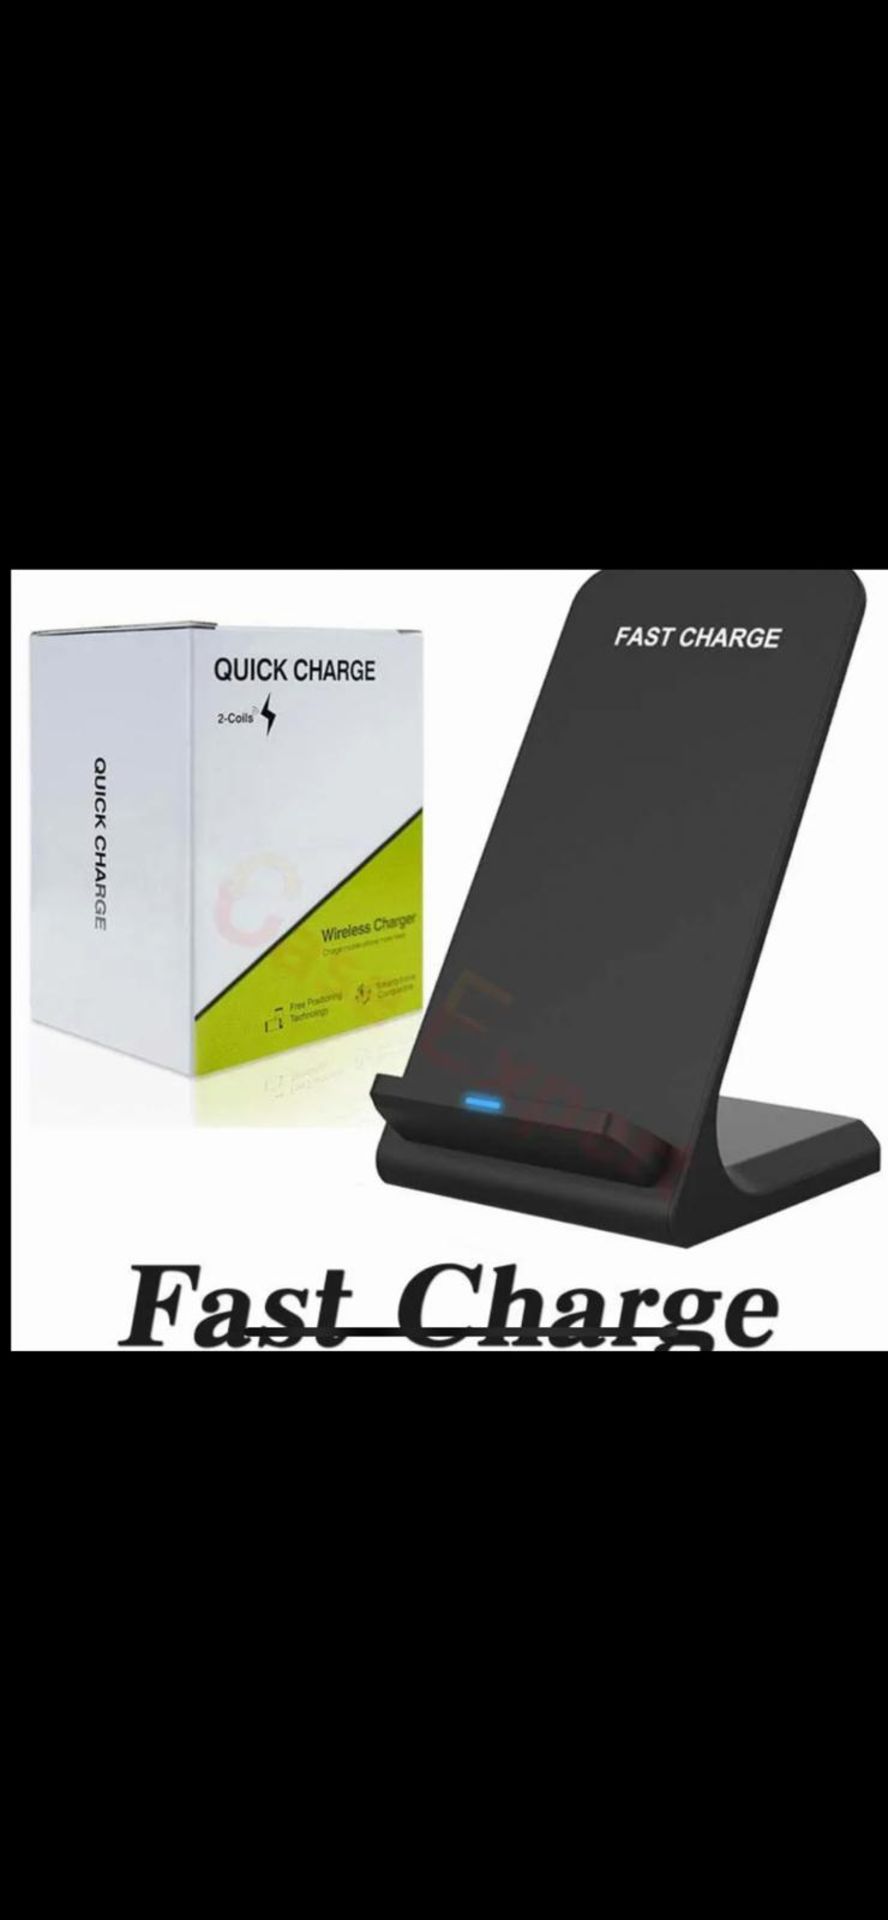 25 x Quick Charge Wireless Charger 2.0 Two Coil  - (NEW) - RRP Â£449 ! - Image 4 of 8